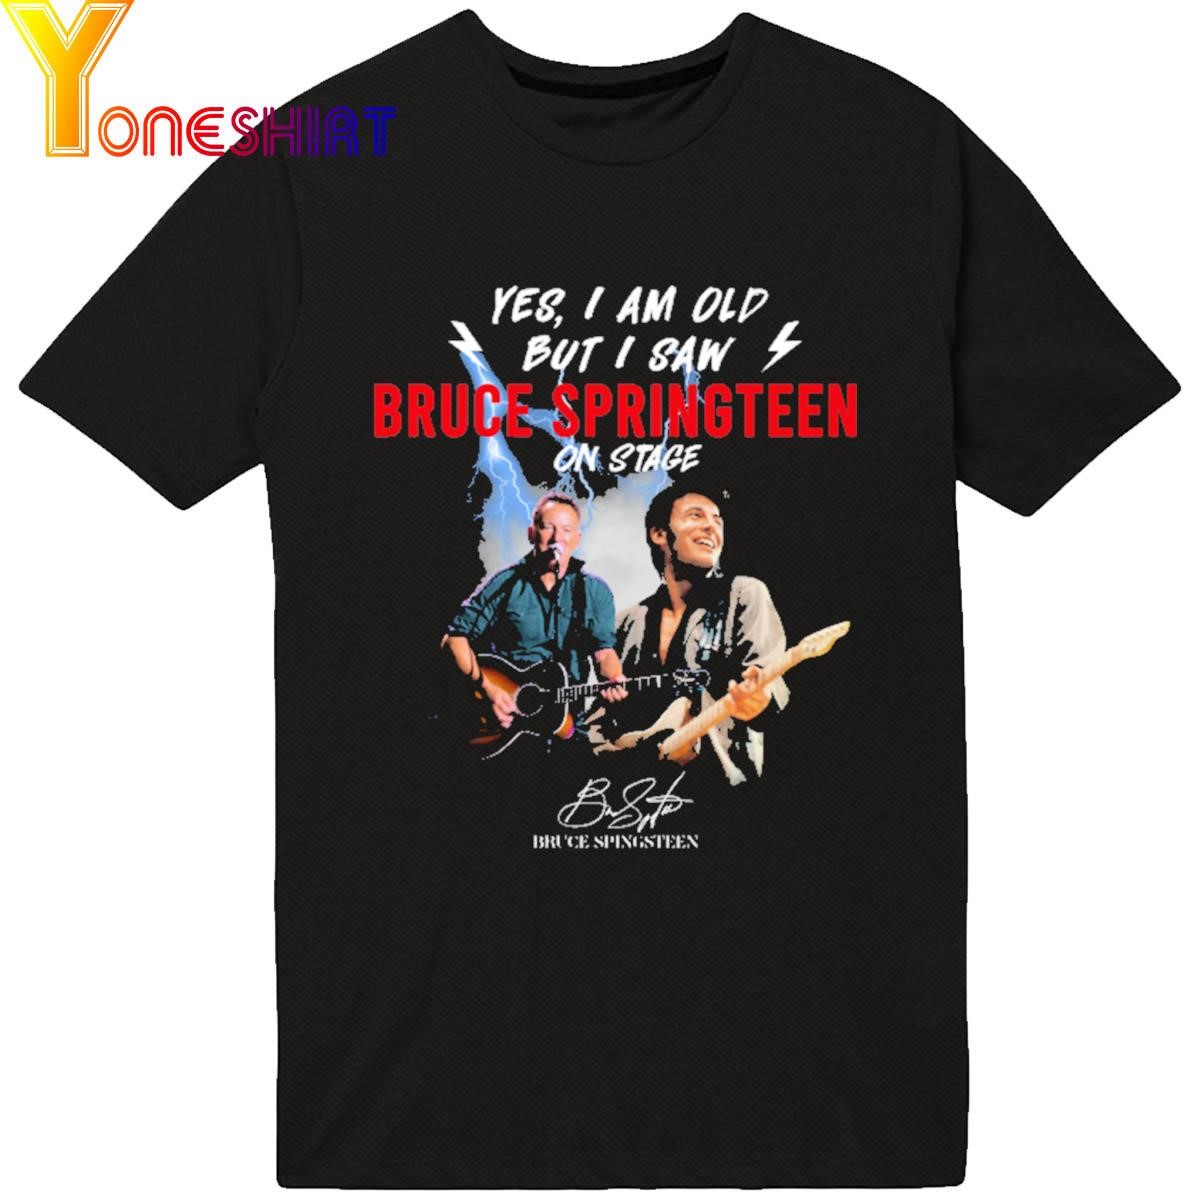 Yes I am old but I saw Bruce Springsteen on State signature shirt